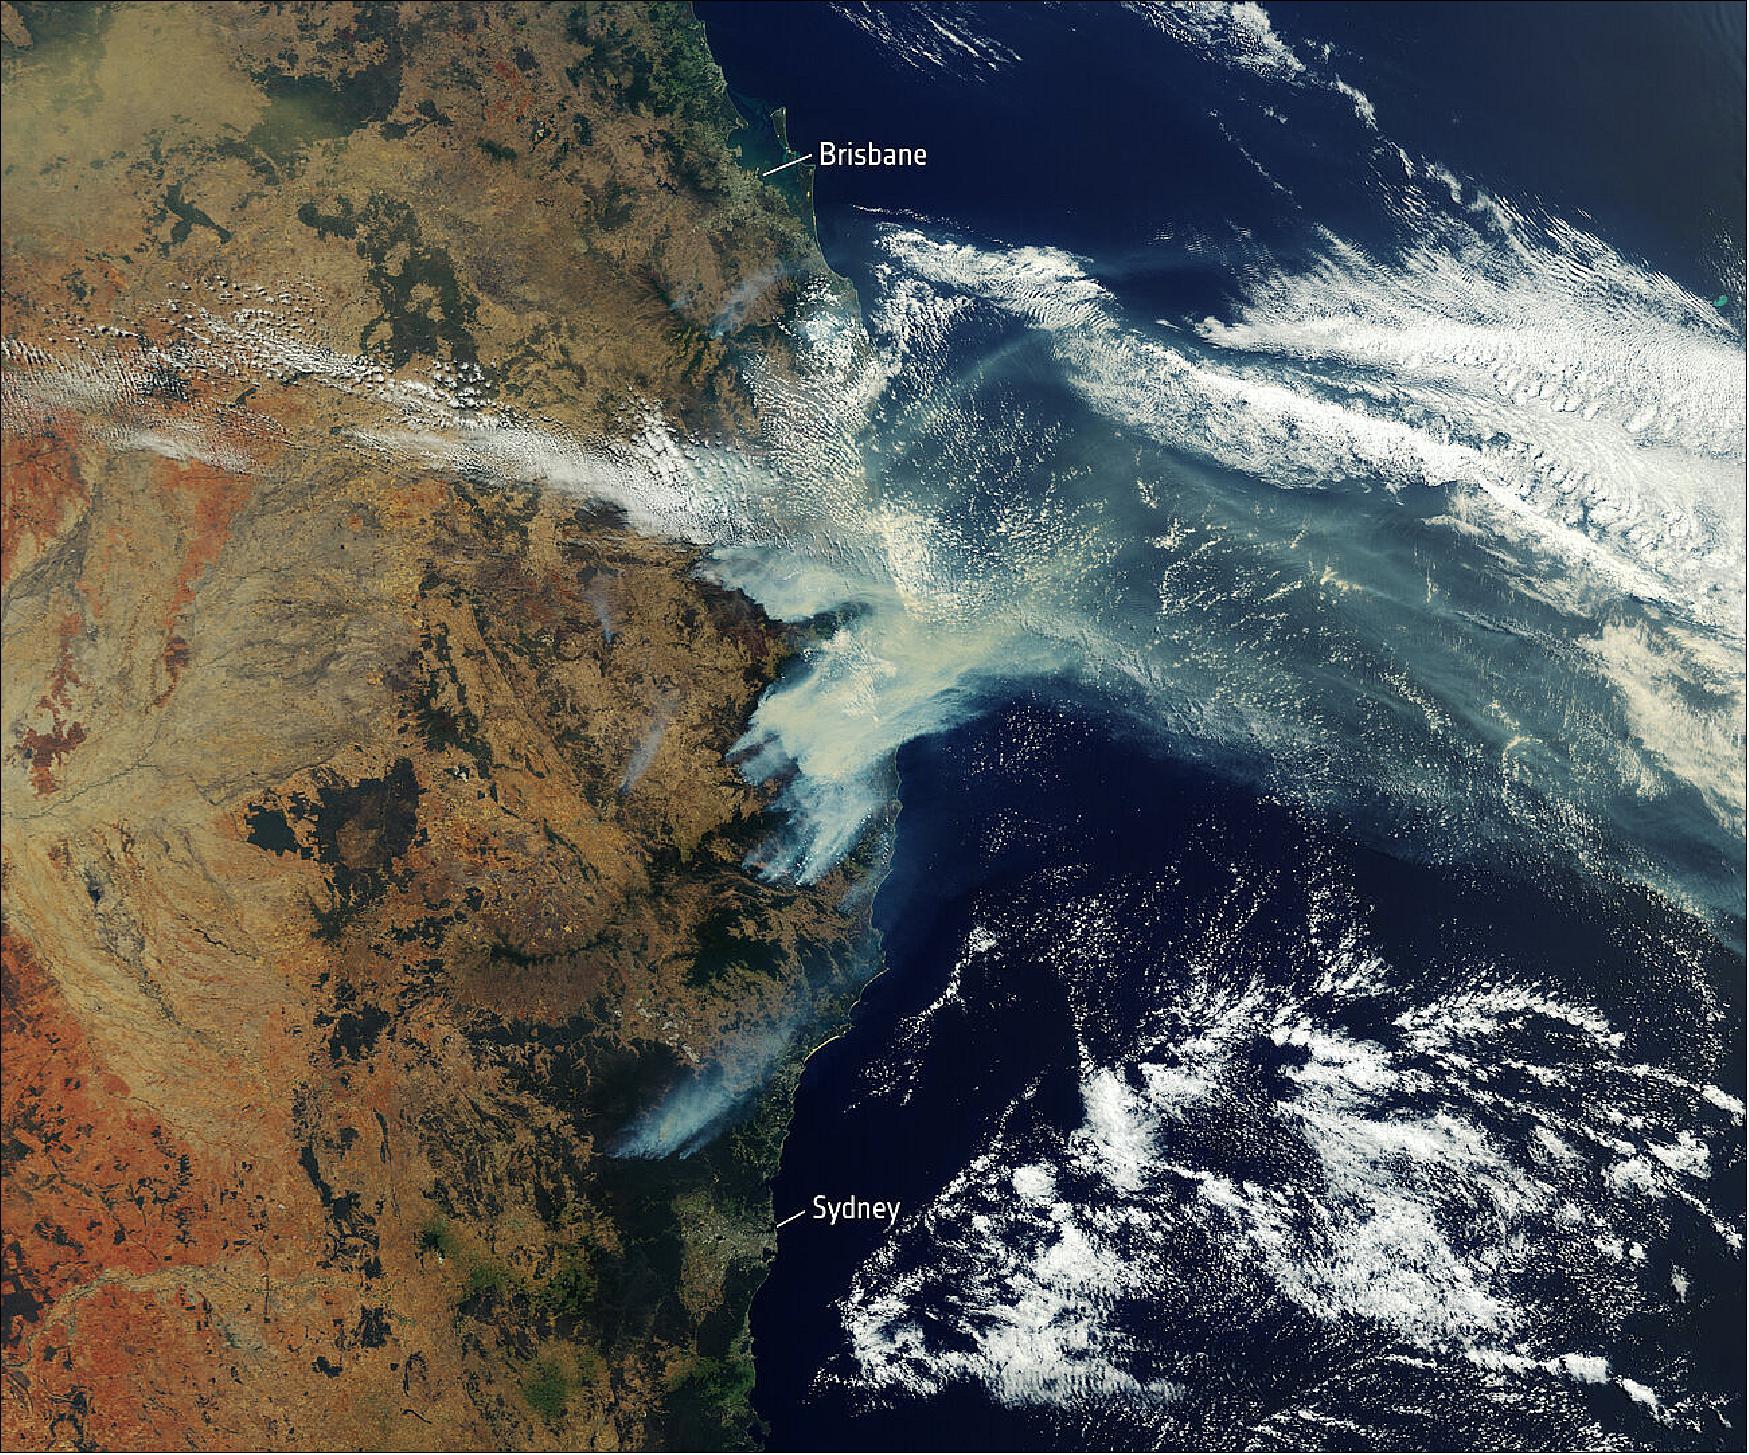 Figure 1: In this image, captured on 12 November 2019 at 23:15 UTC (13 November 09:15 local time), the fires burning near the coast are visible. Plumes of smoke can be seen drifting east over the Tasman Sea. Hazardous air quality owing to the smoke haze has reached the cities of Sydney and Brisbane and is affecting residents, the Australian Environmental Department has warned (image credit: ESA, the image contains modified Copernicus Sentinel data (2019), processed by ESA, CC BY-SA 3.0 IGO)